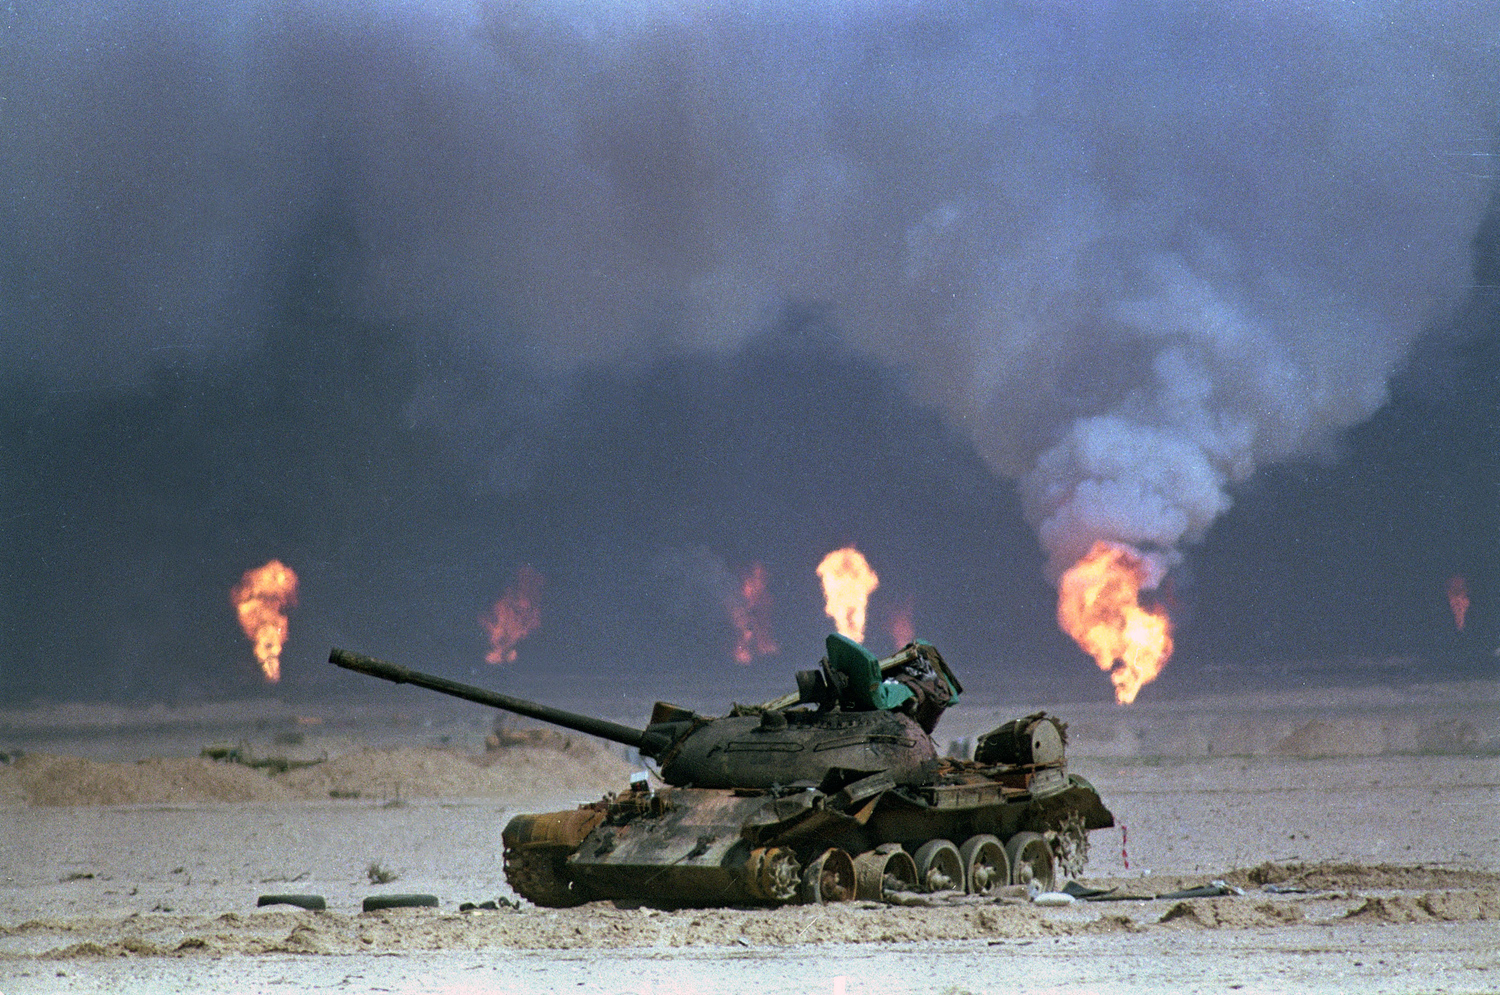 Operation Desert Storm: 25 Years Since the First Gulf War - The